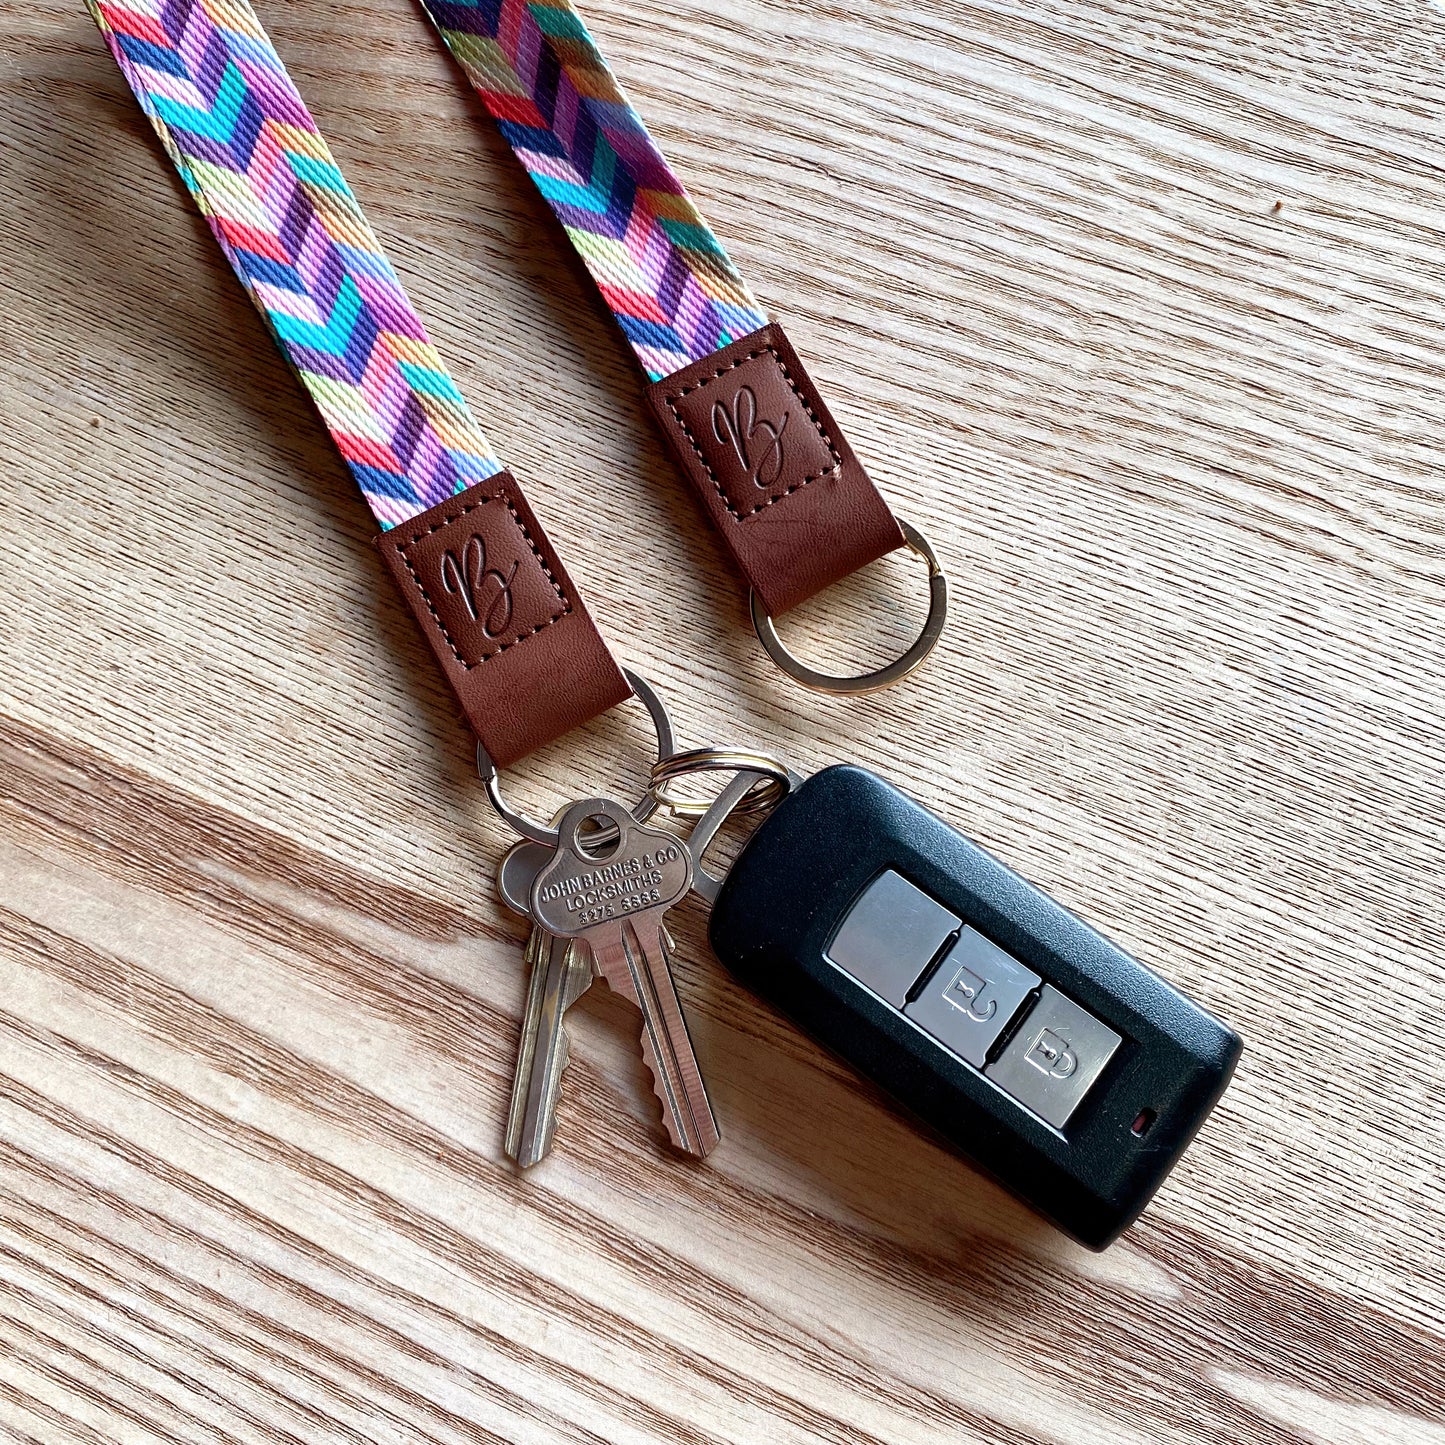 hold your car key and house keys on your wristlet strap keychain